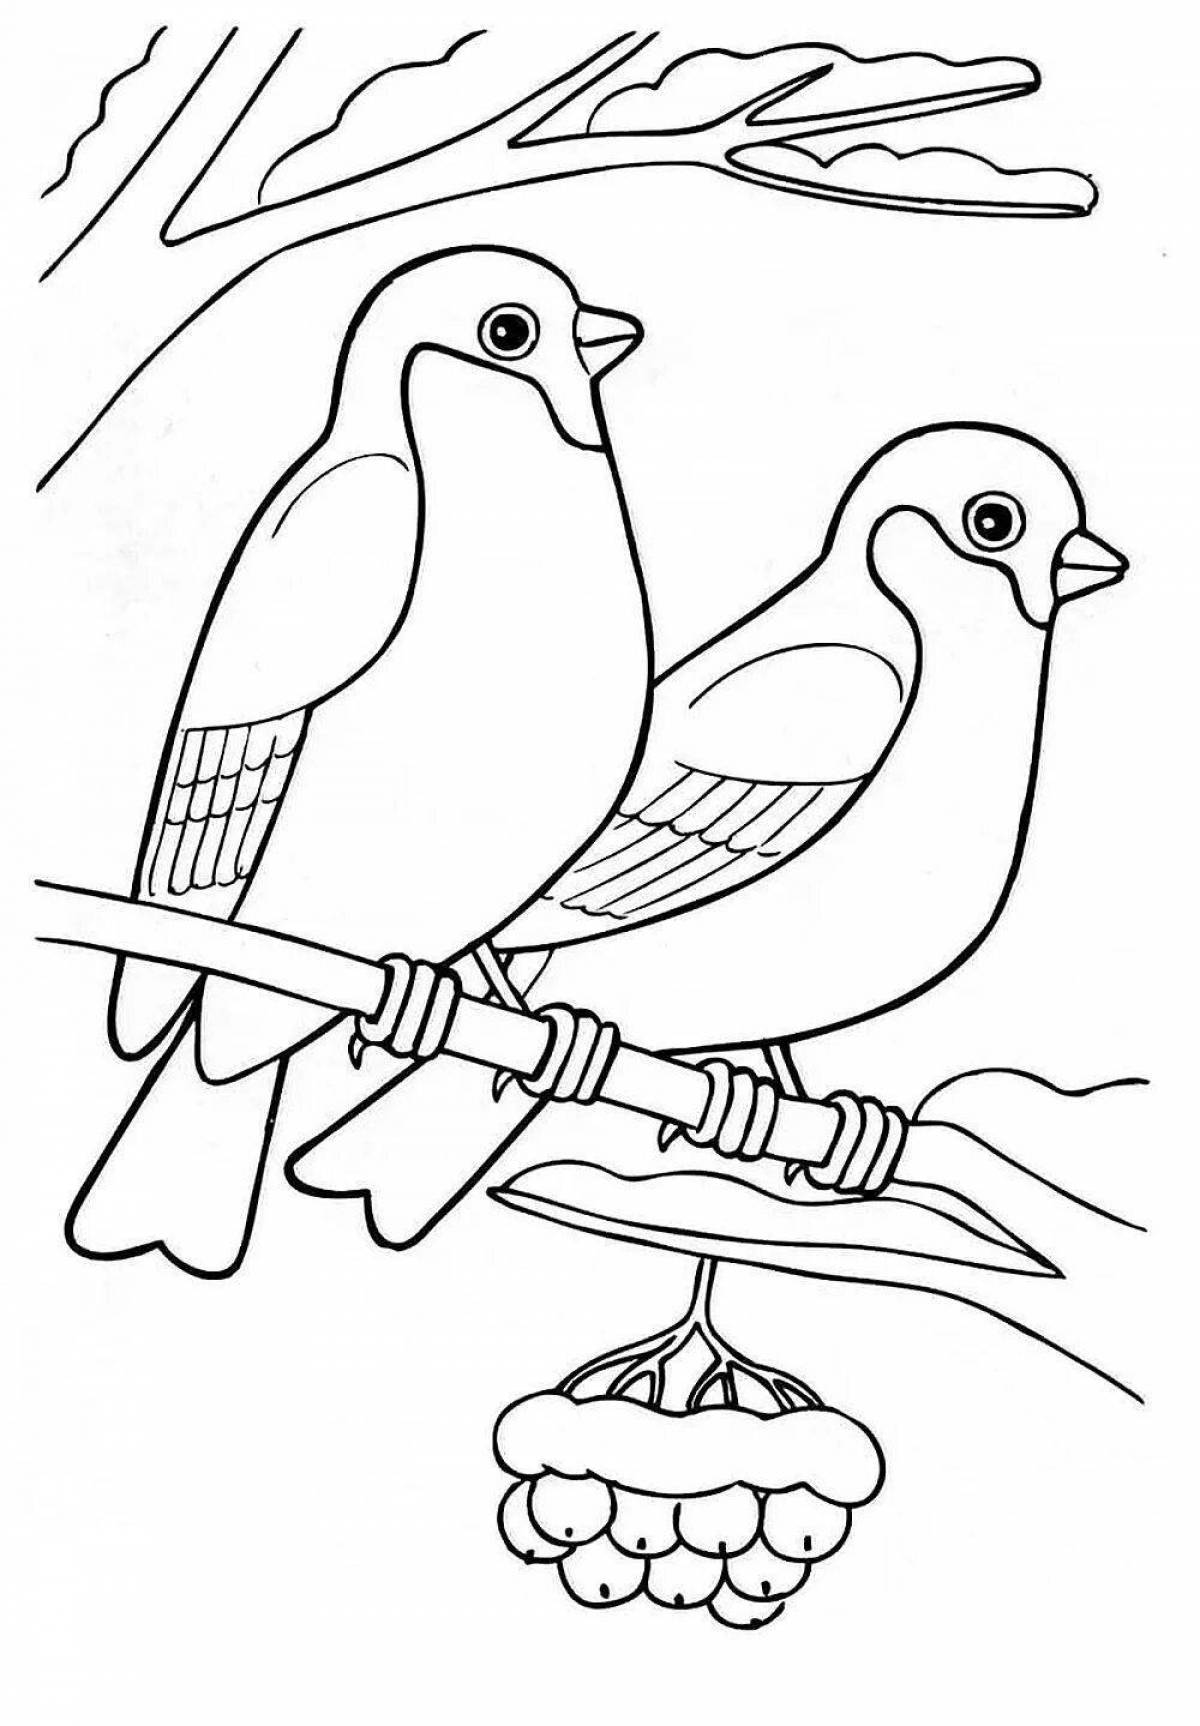 A fun coloring page for our bird friends